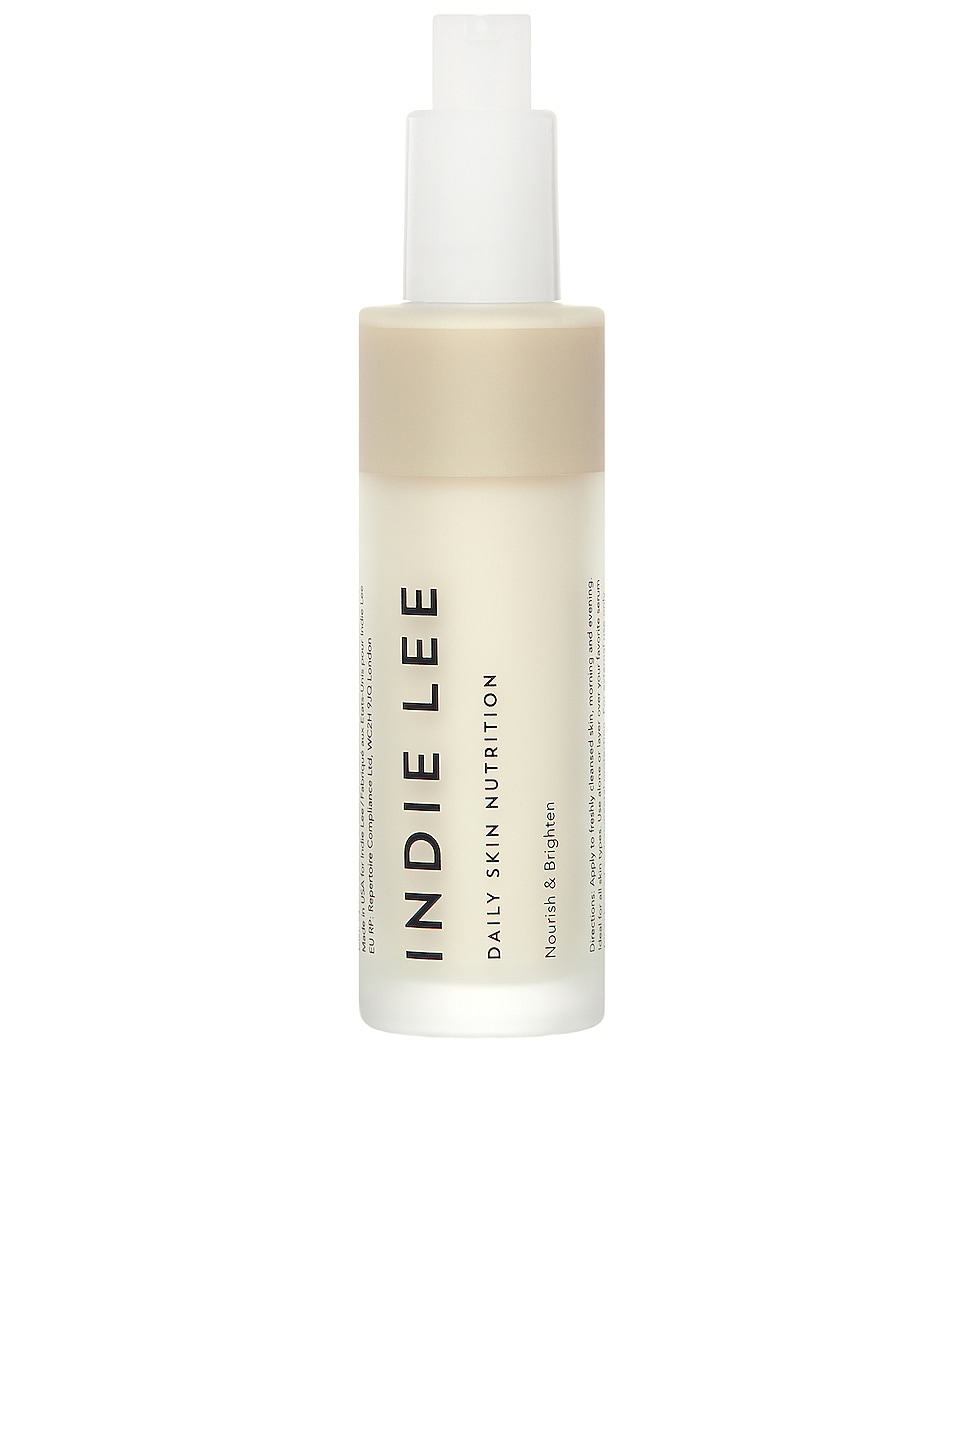 Indie Lee Daily Skin Nutrition | REVOLVE